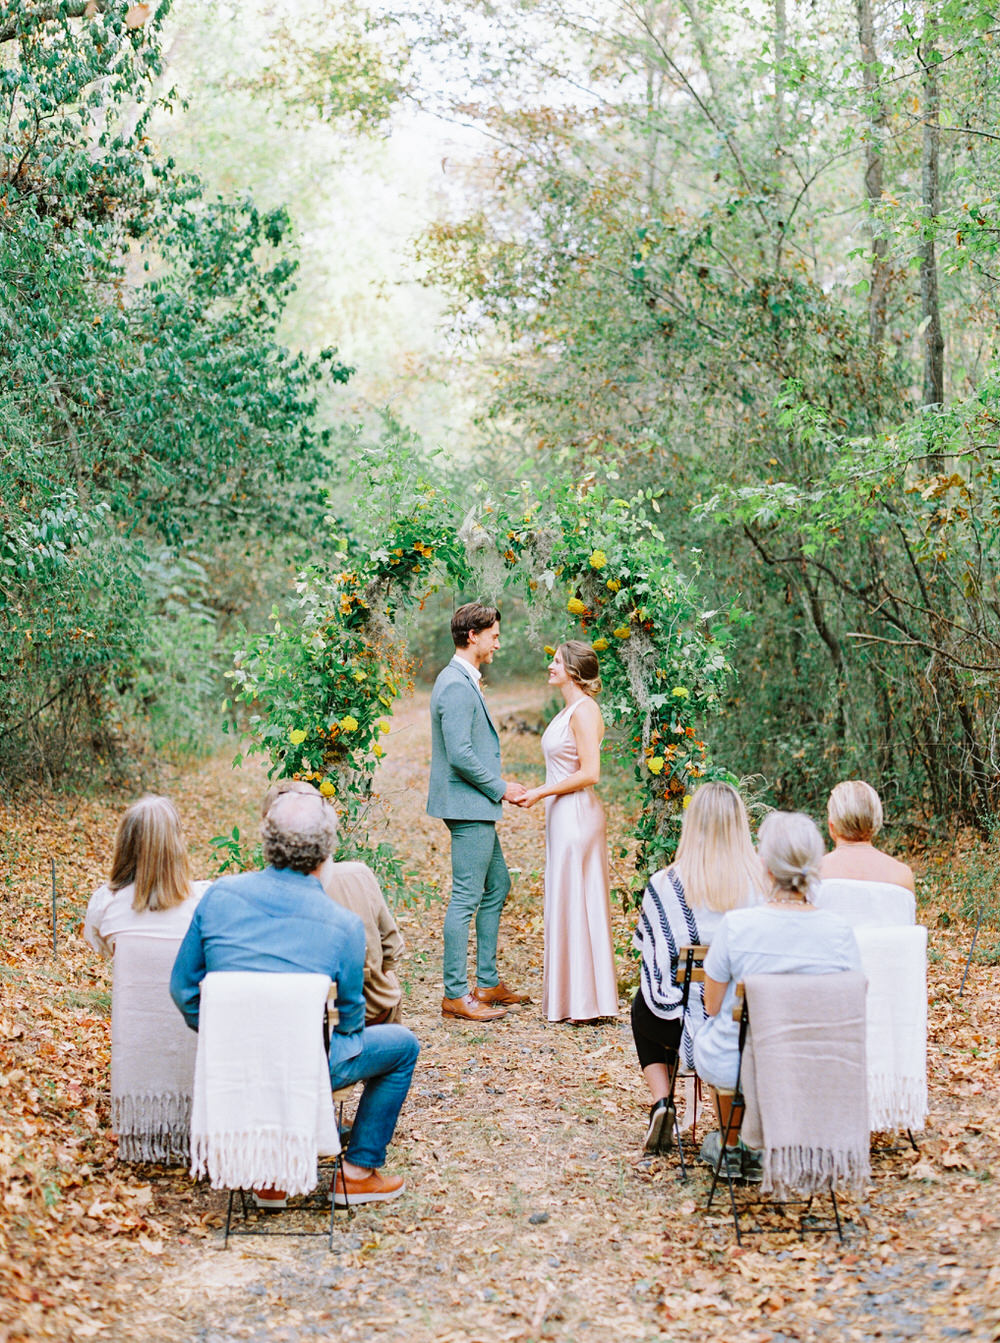 autumn wedding ceremony with a foraged flower arch, groom in sage green suit and bride in apricot silk gown